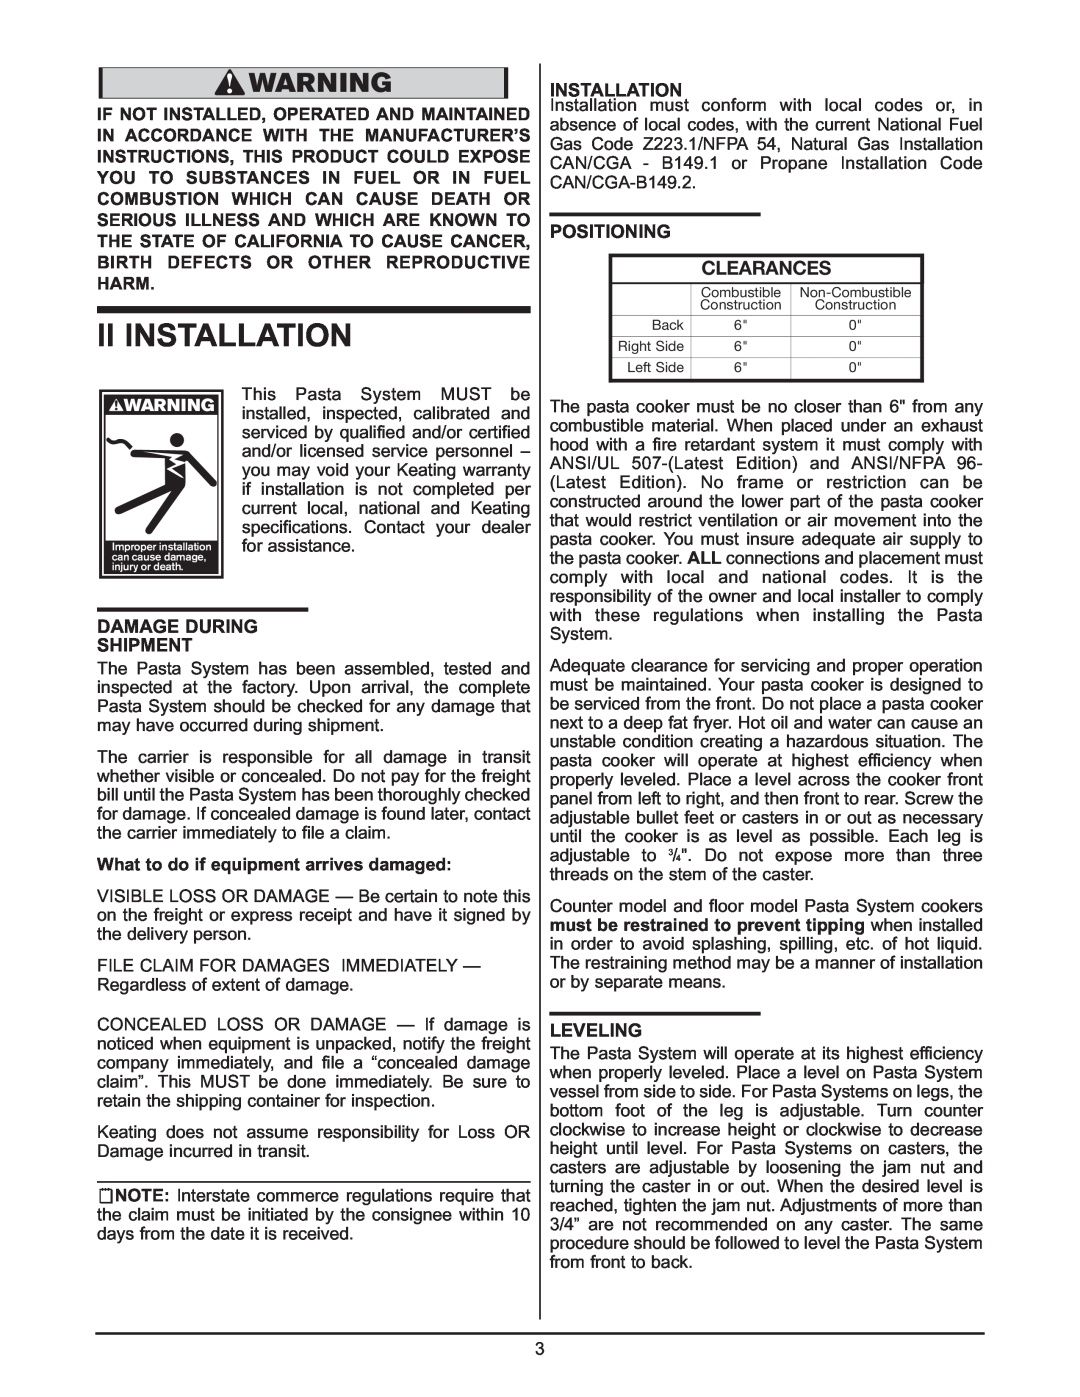 Keating Of Chicago 0107 service manual Ii Installation, Clearances, Positioning, Damage During Shipment, Leveling 